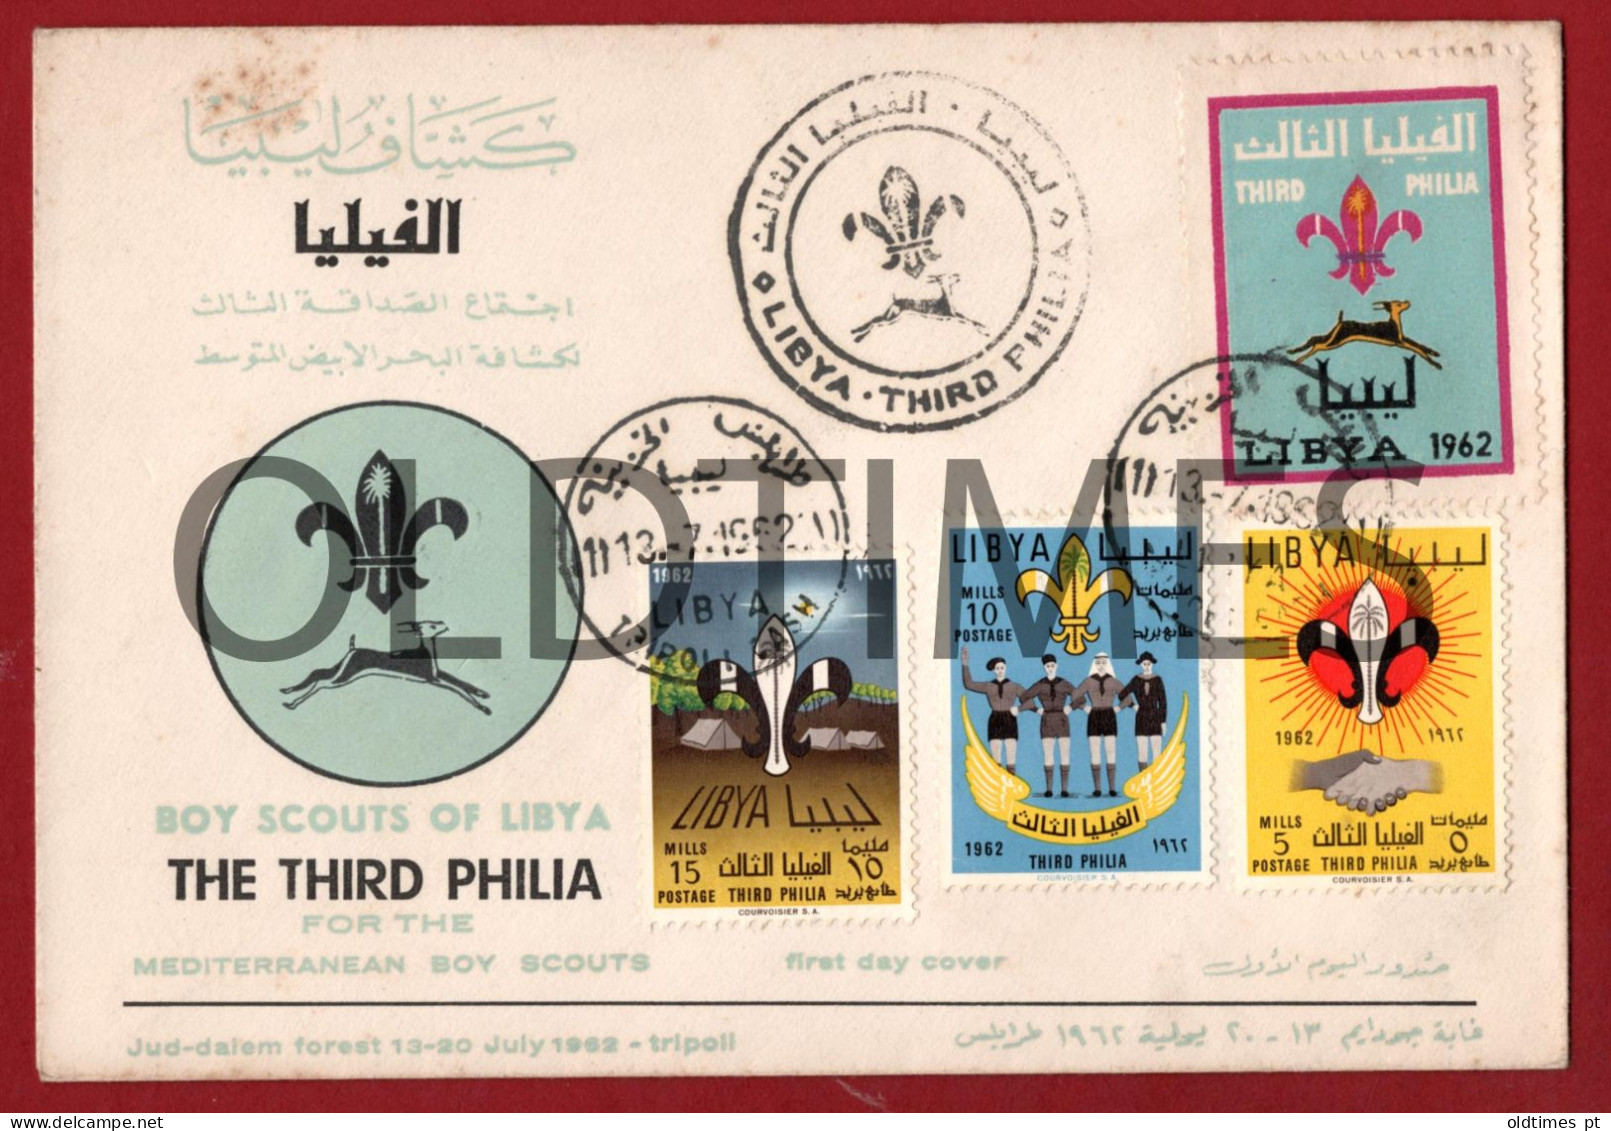 LIBYA - BOY SCOUTS OF LIBYA - THE THIRD PHILIA FOR THE MEDITERRANEAN - FIRST DAY COVER - 1962 ENVELOPE - Scouting